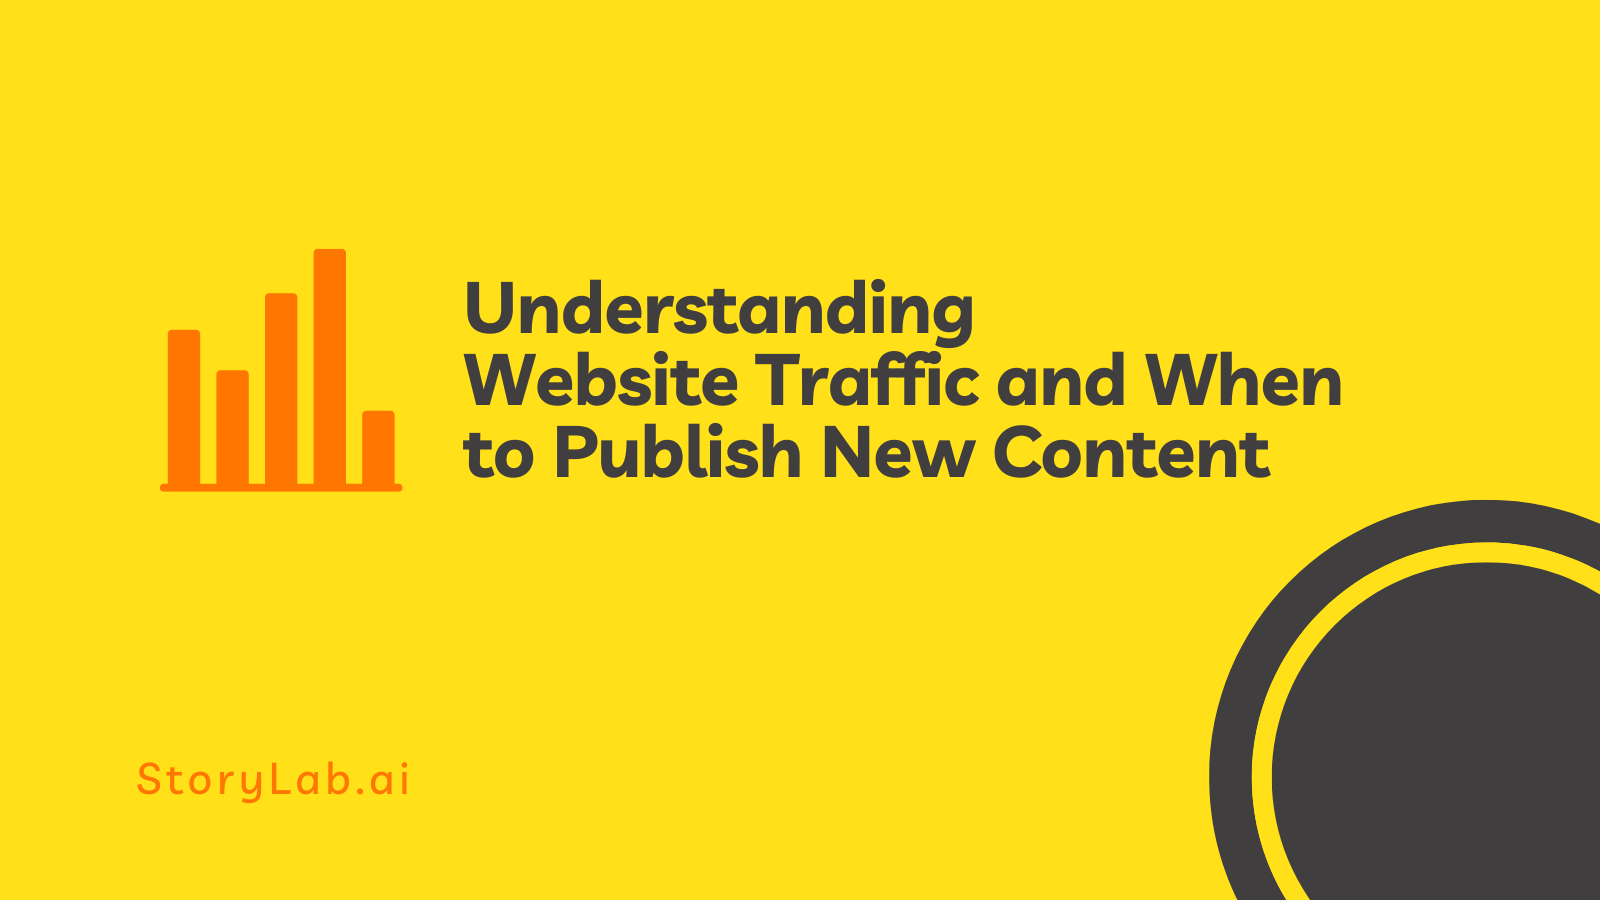 Making Sense of Stats - Understanding Website Traffic and Deciding When to Publish New Content